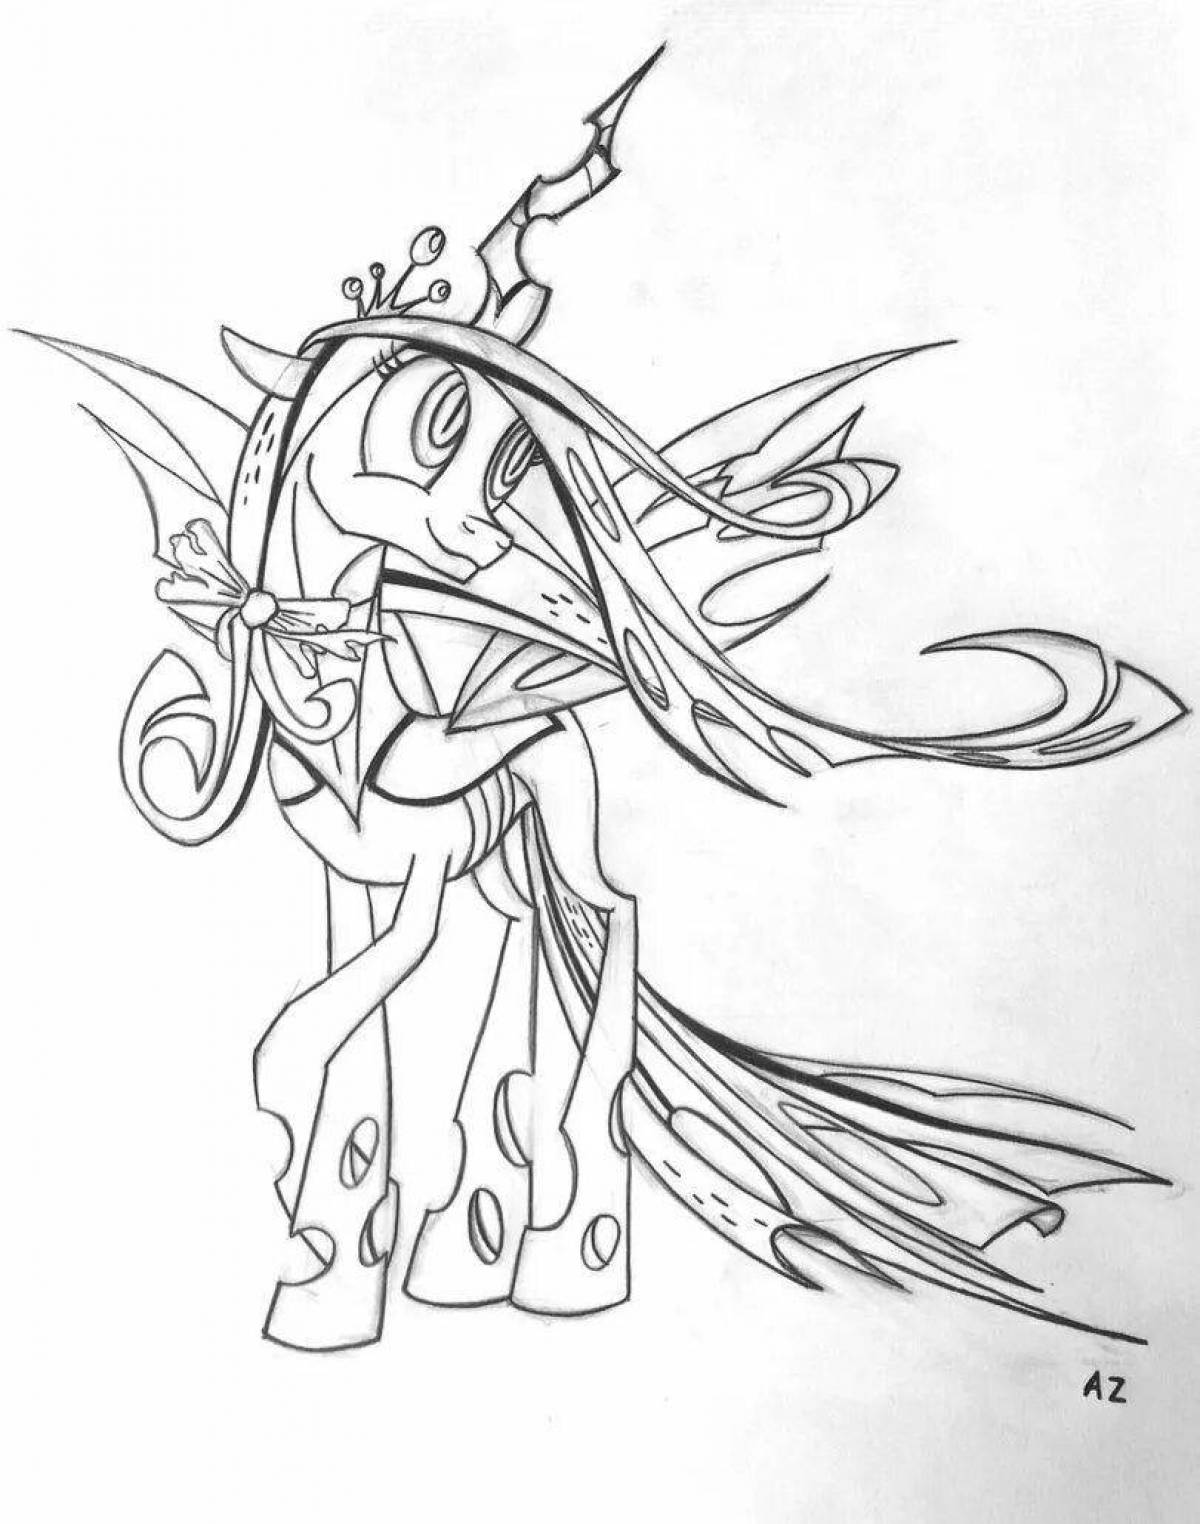 Exquisite chrysalis pony coloring page